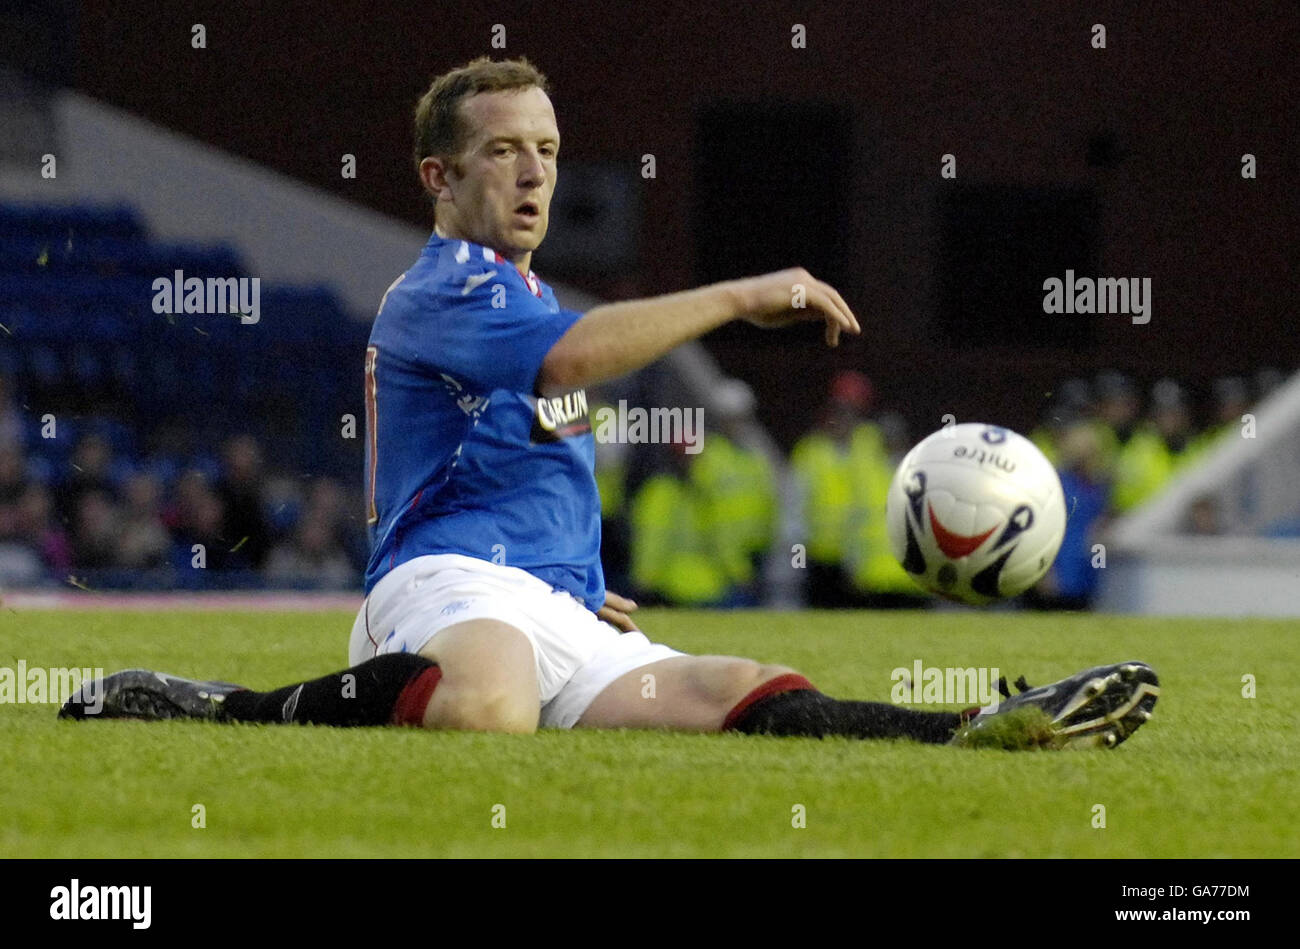 Rangers' Charlie Adam on the ball during the pre-season friendly match at Ibrox, Glasgow. Stock Photo